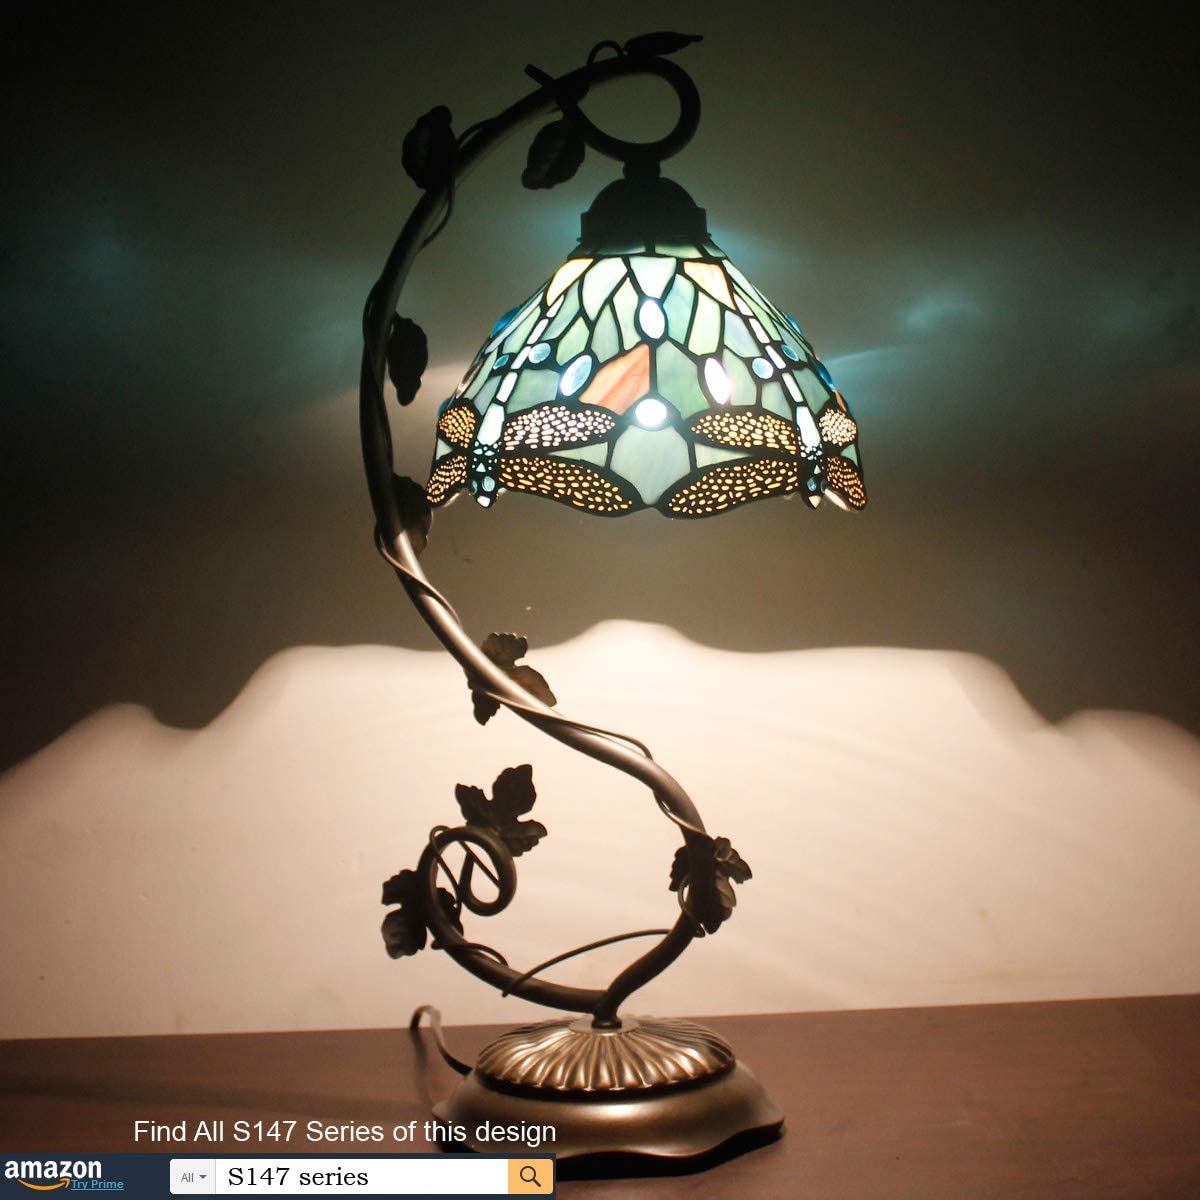 SHADY  Lamp Sea Blue Stained Glass Dragonfly Style Desk Reading Light  Metal Leaf Table Lamp Base 8X10X21 Inches Decor Small Space Bedside Bedroom Home Office S147 Series